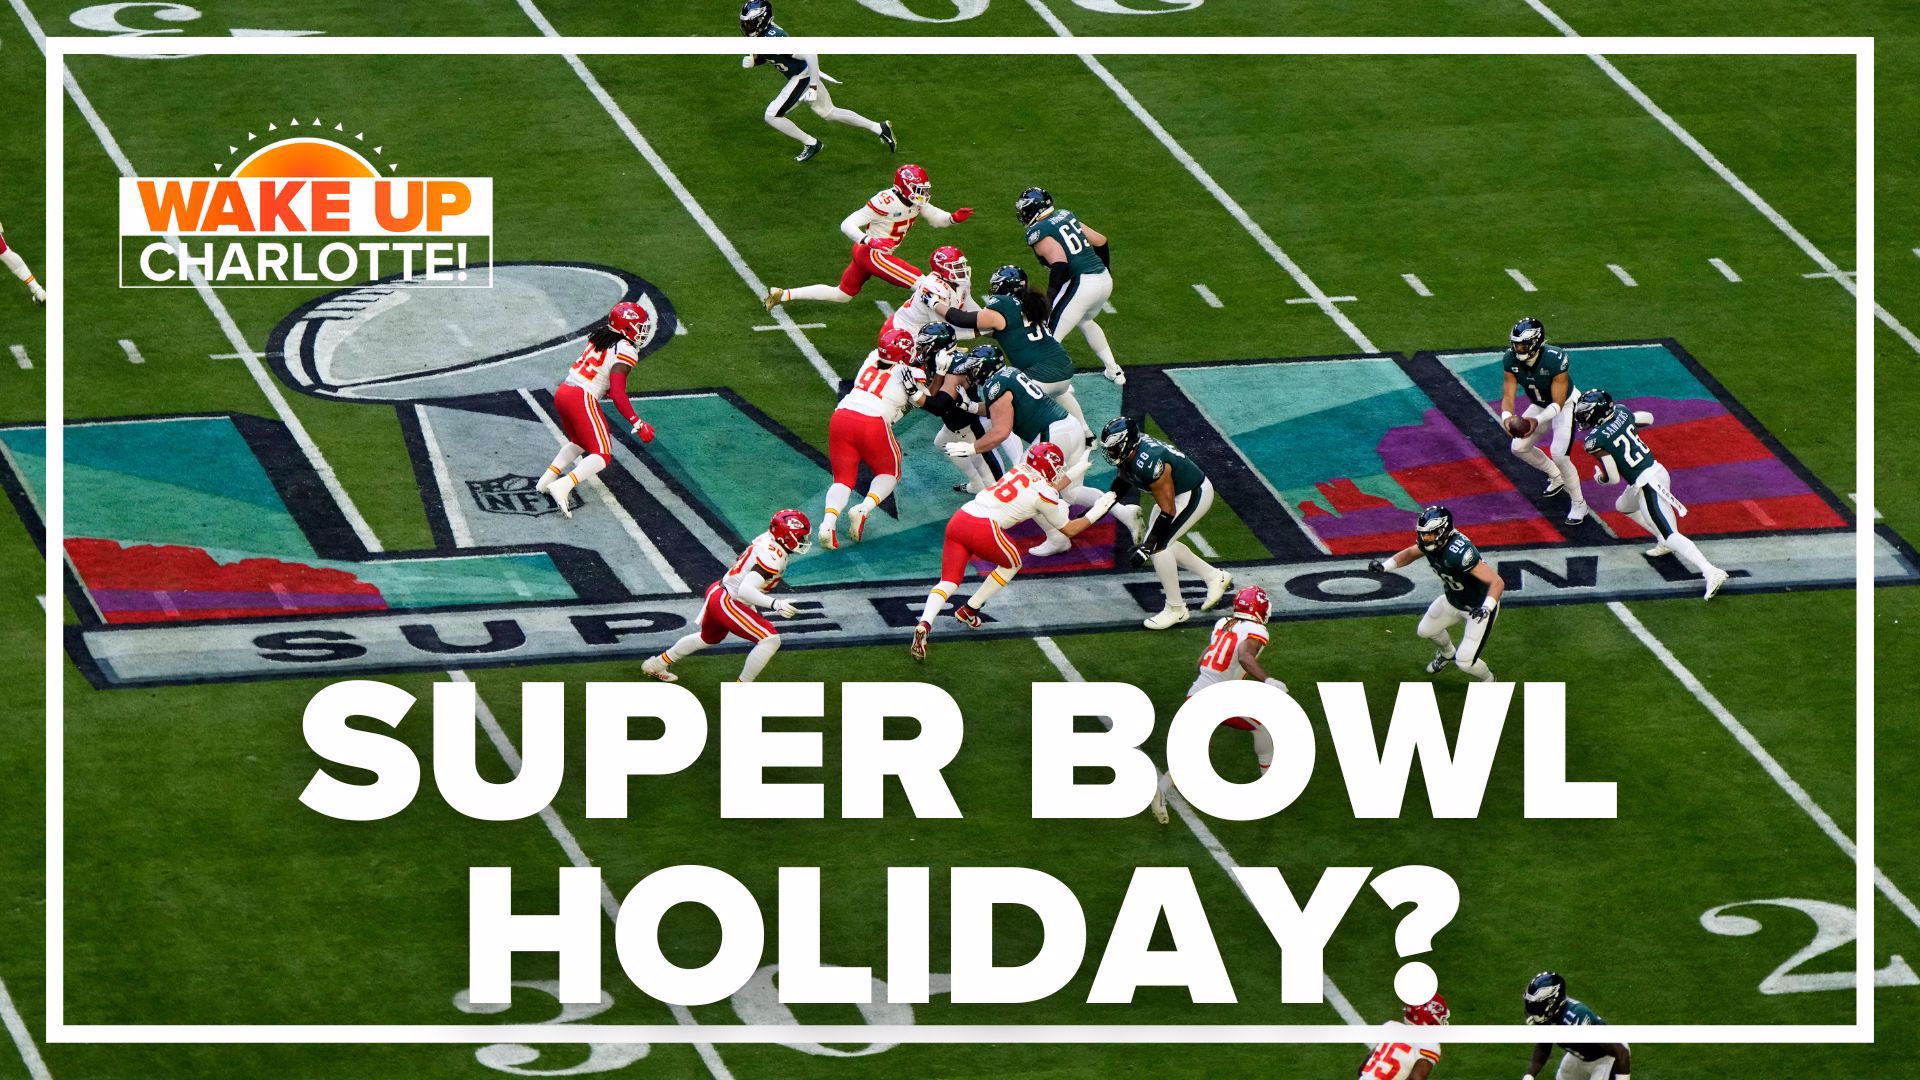 Millions of Americans are dragging into work Monday after a thrilling Super Bowl. Should the day after the big game be a national holiday?